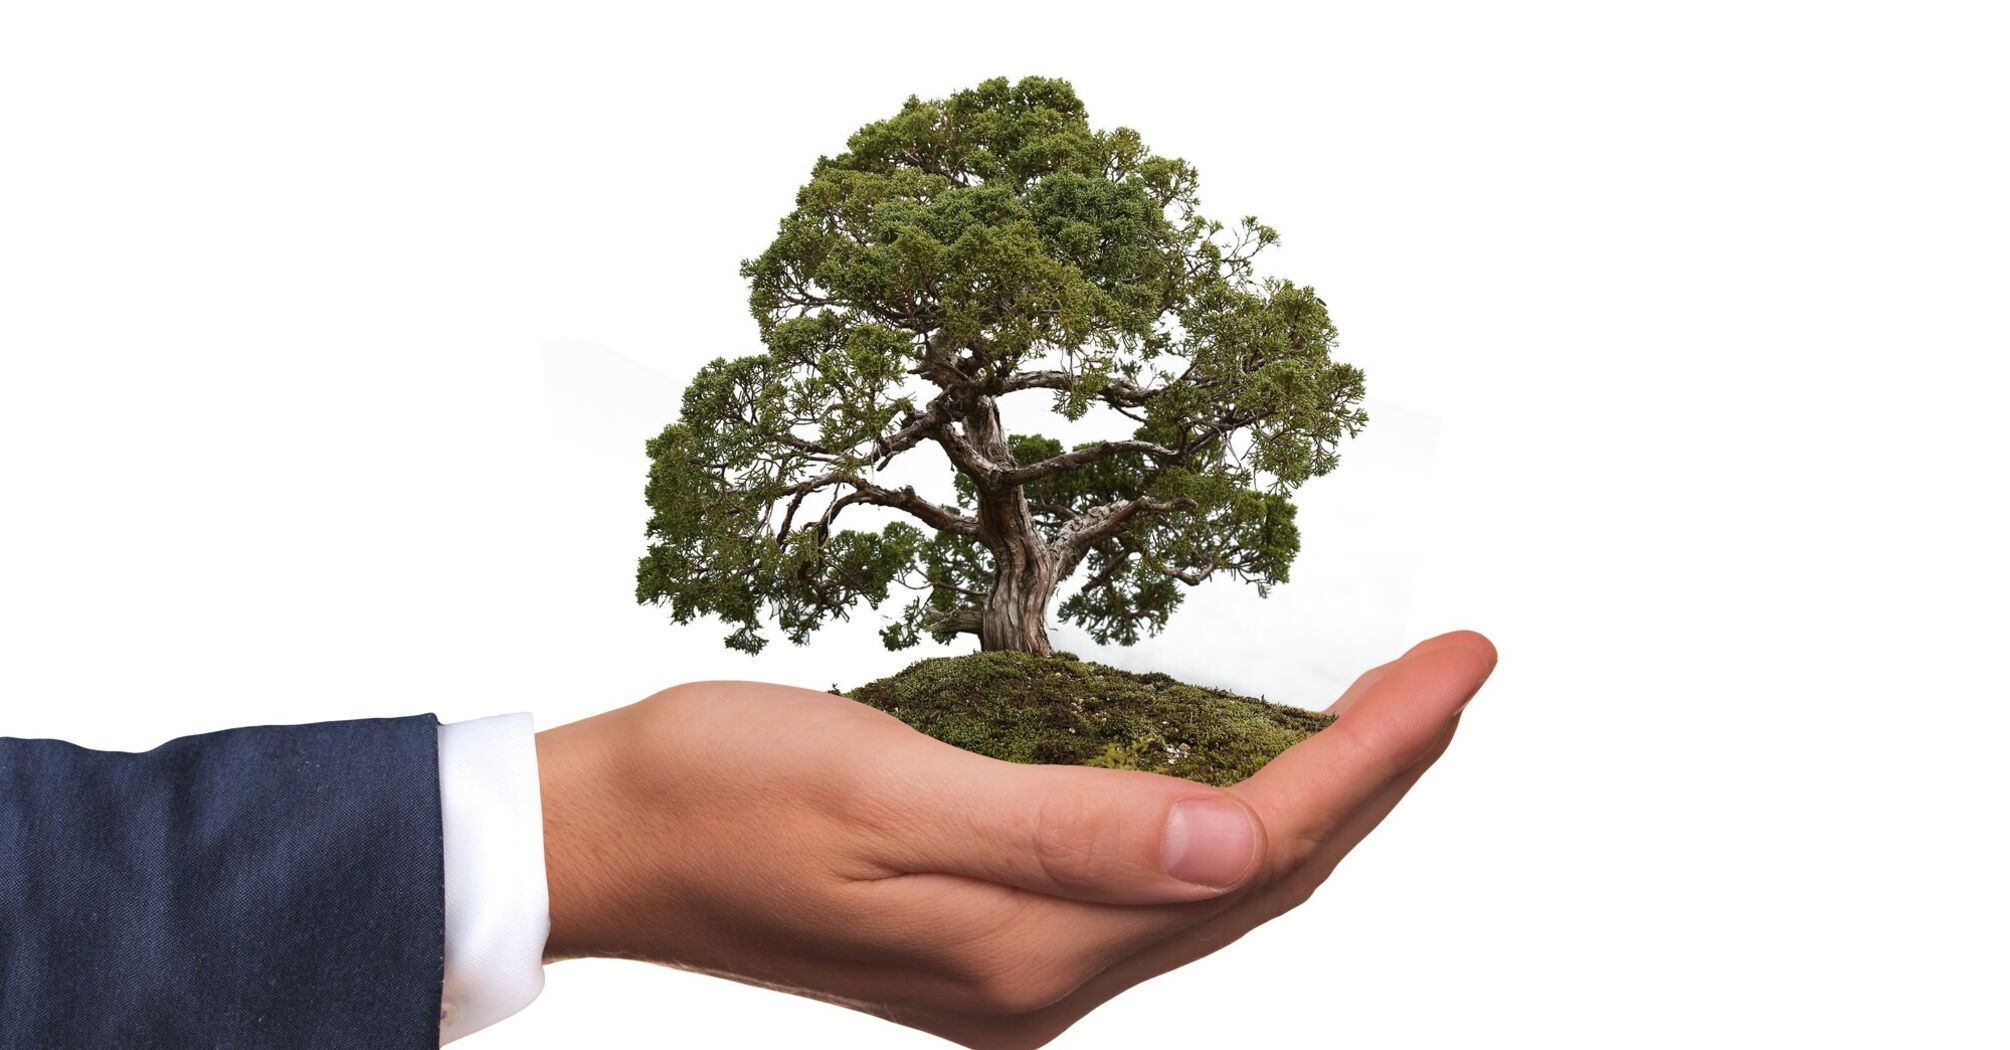 A hand in a suit holding a tree, symbolizing environmental care and sustainability